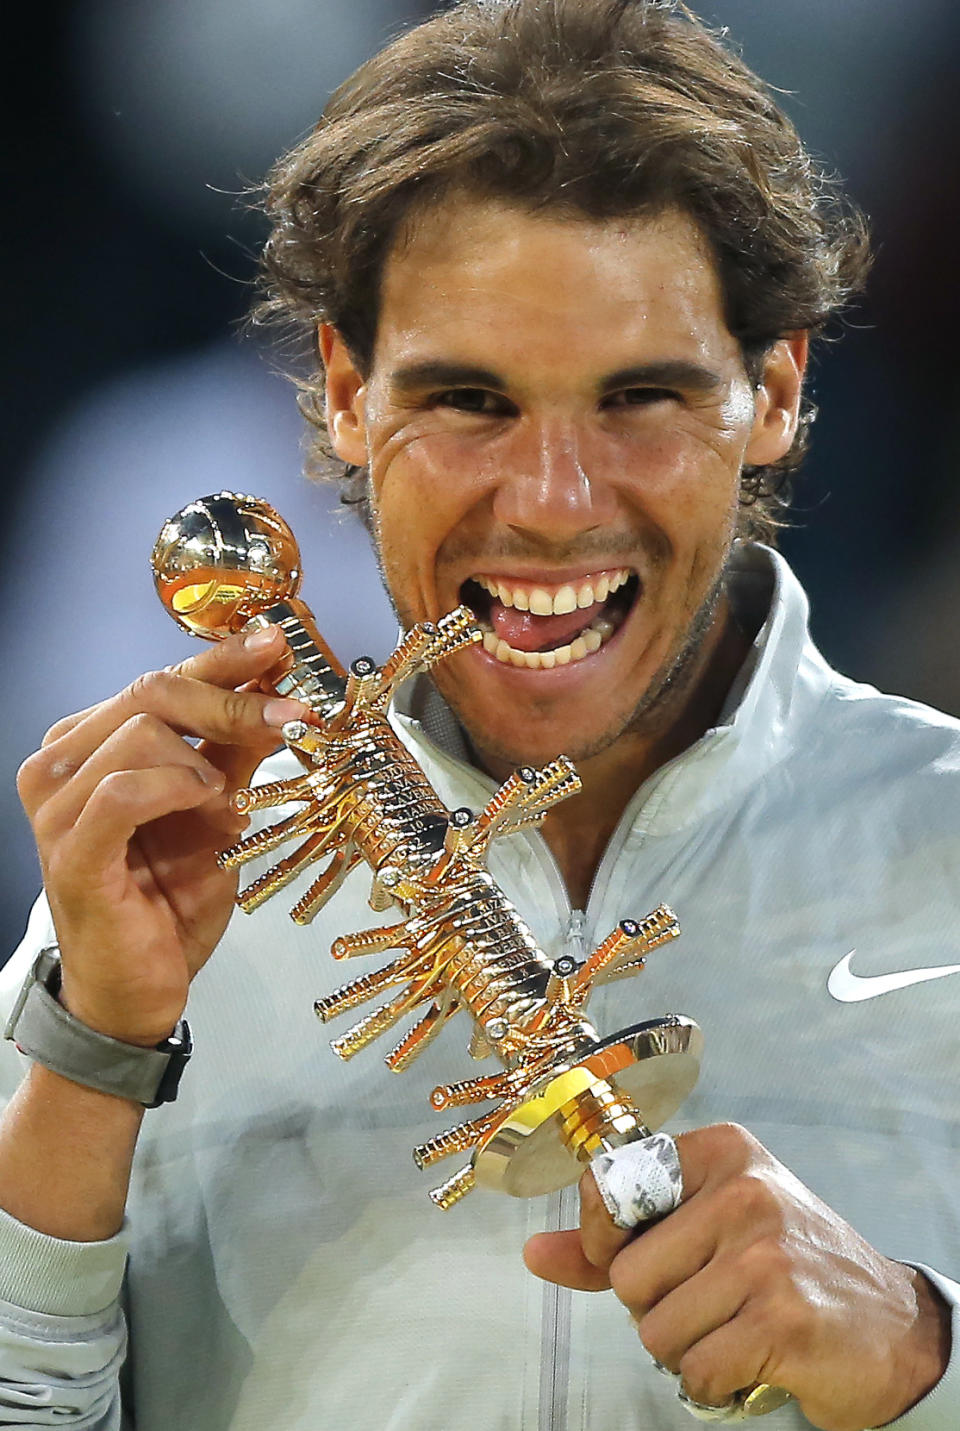 Rafael Nadal from Spain poses for photographers with his trophy, after winning his Madrid Open tennis tournament, men's final match against Kei Nishikori from Japan in Madrid, Spain, Sunday, May 11, 2014. (AP Photo/Andres Kudacki)